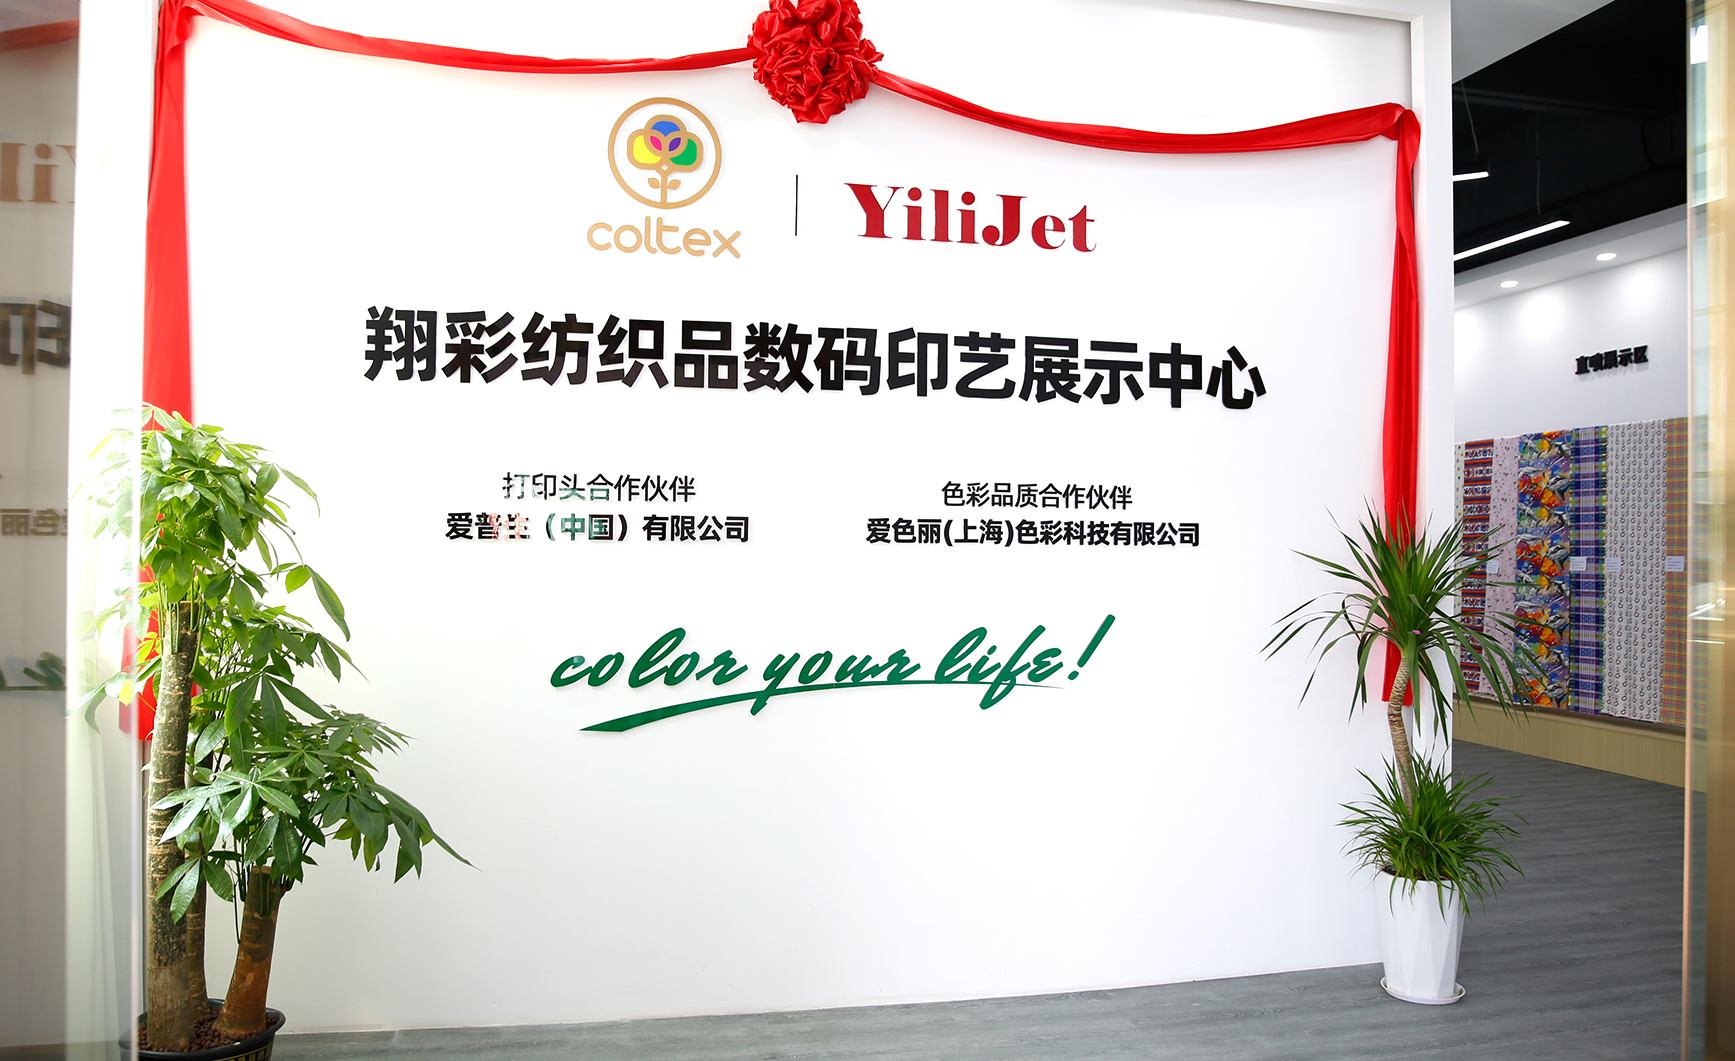 The first Coltex Digital Printing Salon was successfully held in Guangzhou